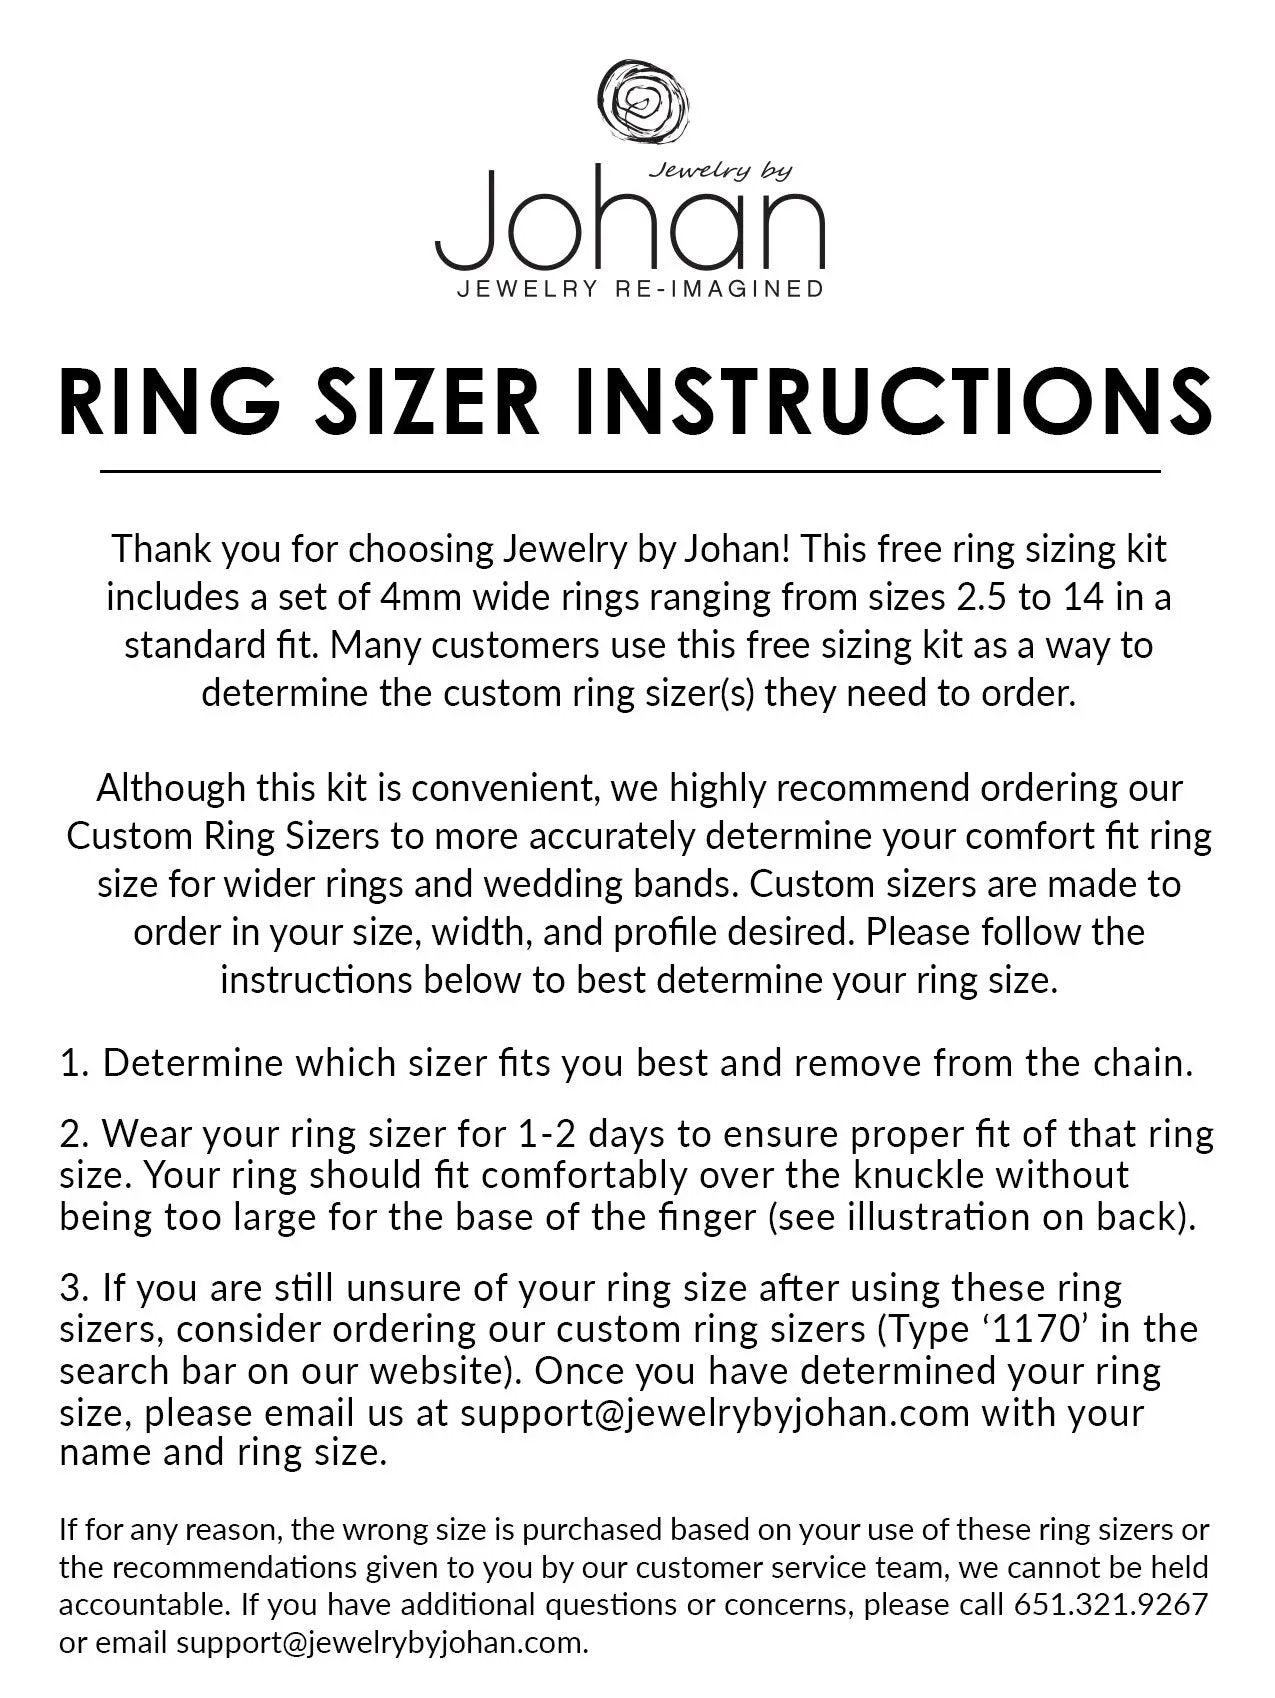 Ring Sizers, Custom Made to Order, Recommended to Purchase With